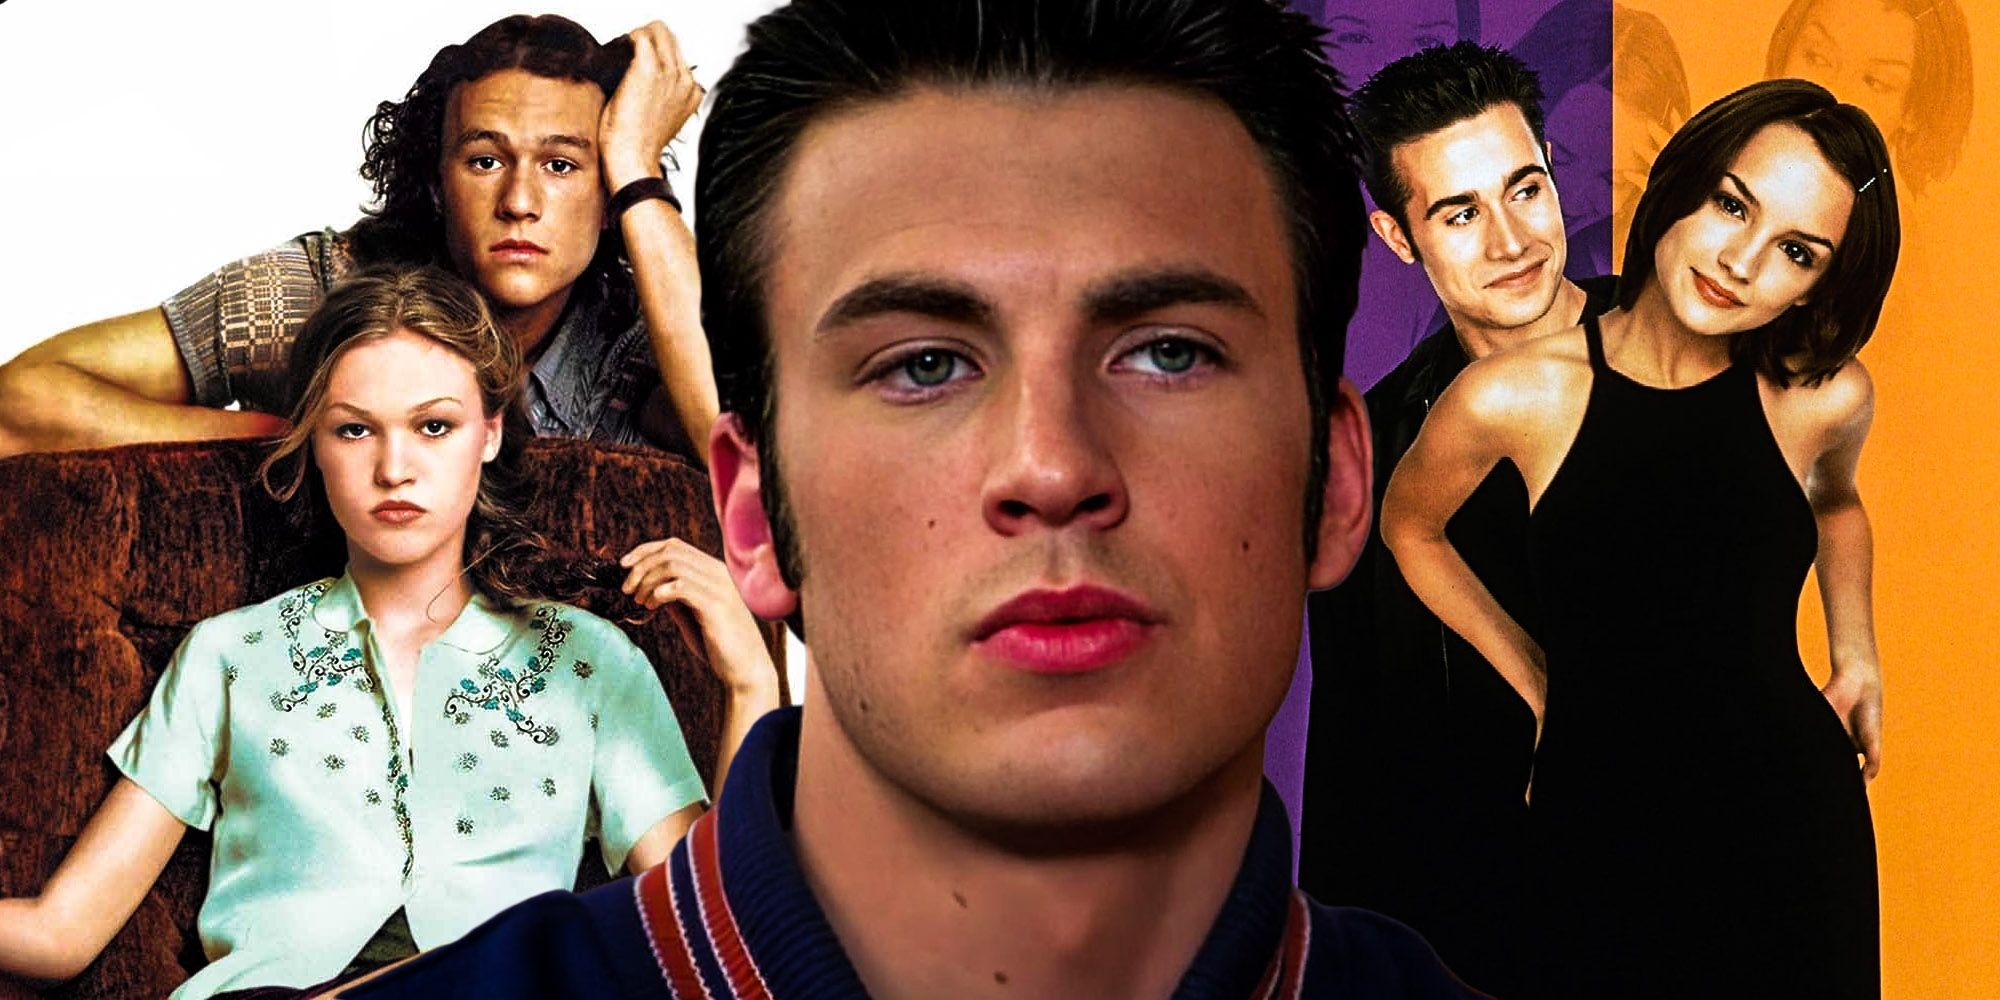 Not another teen movie Chris evans references 10 things I hate about your shes all that